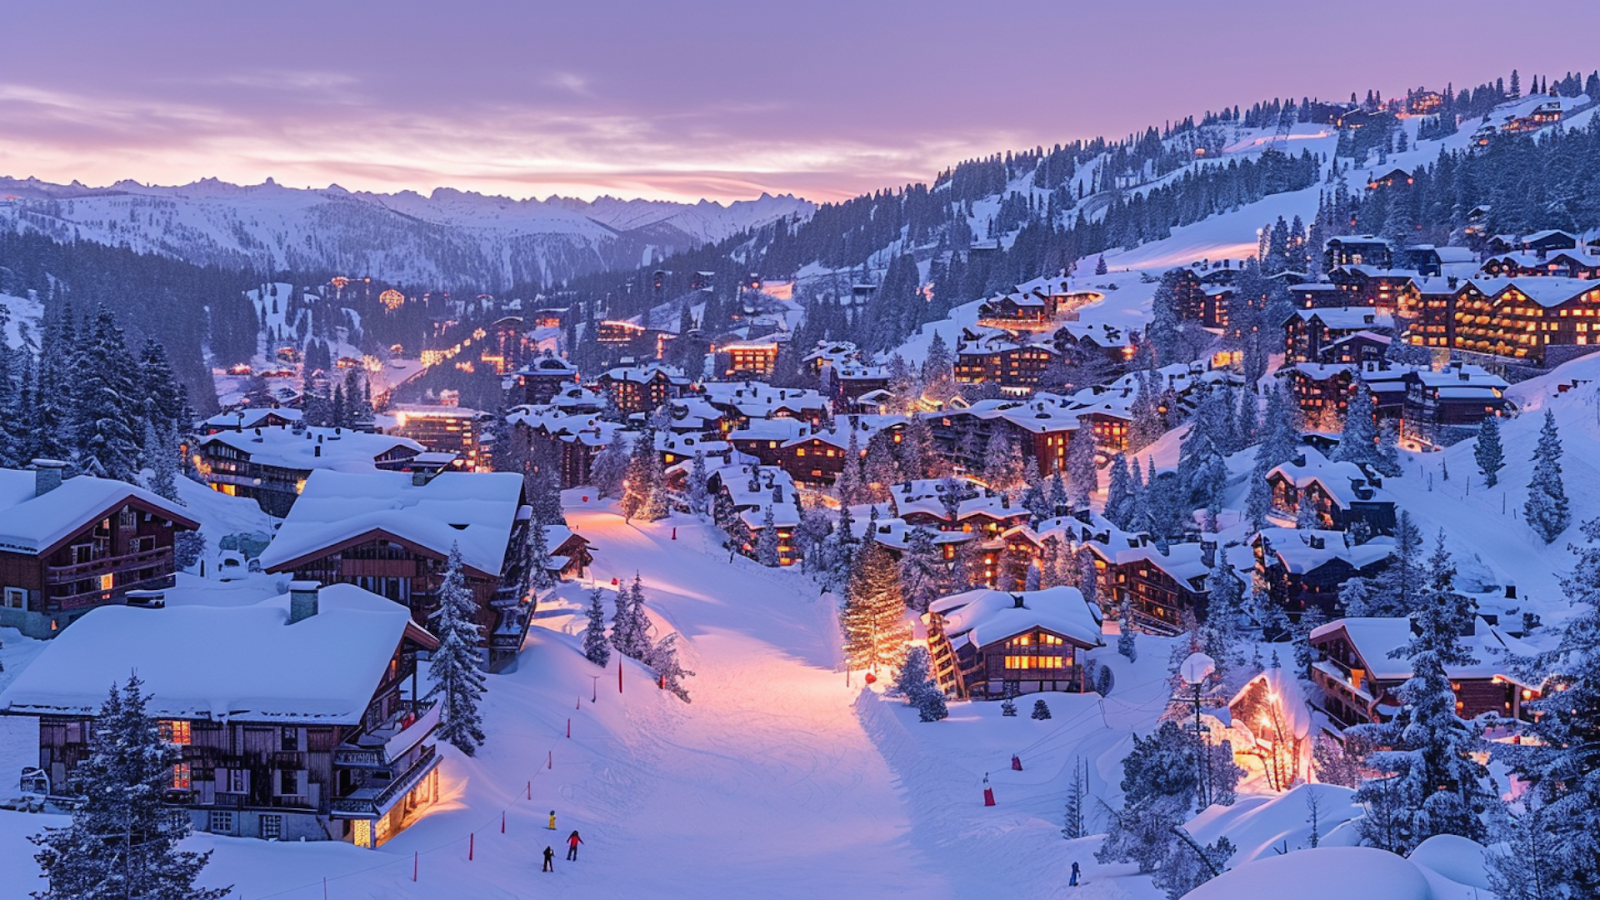 An aerial shot of Courchevel, France showing snow-covered trees and houses